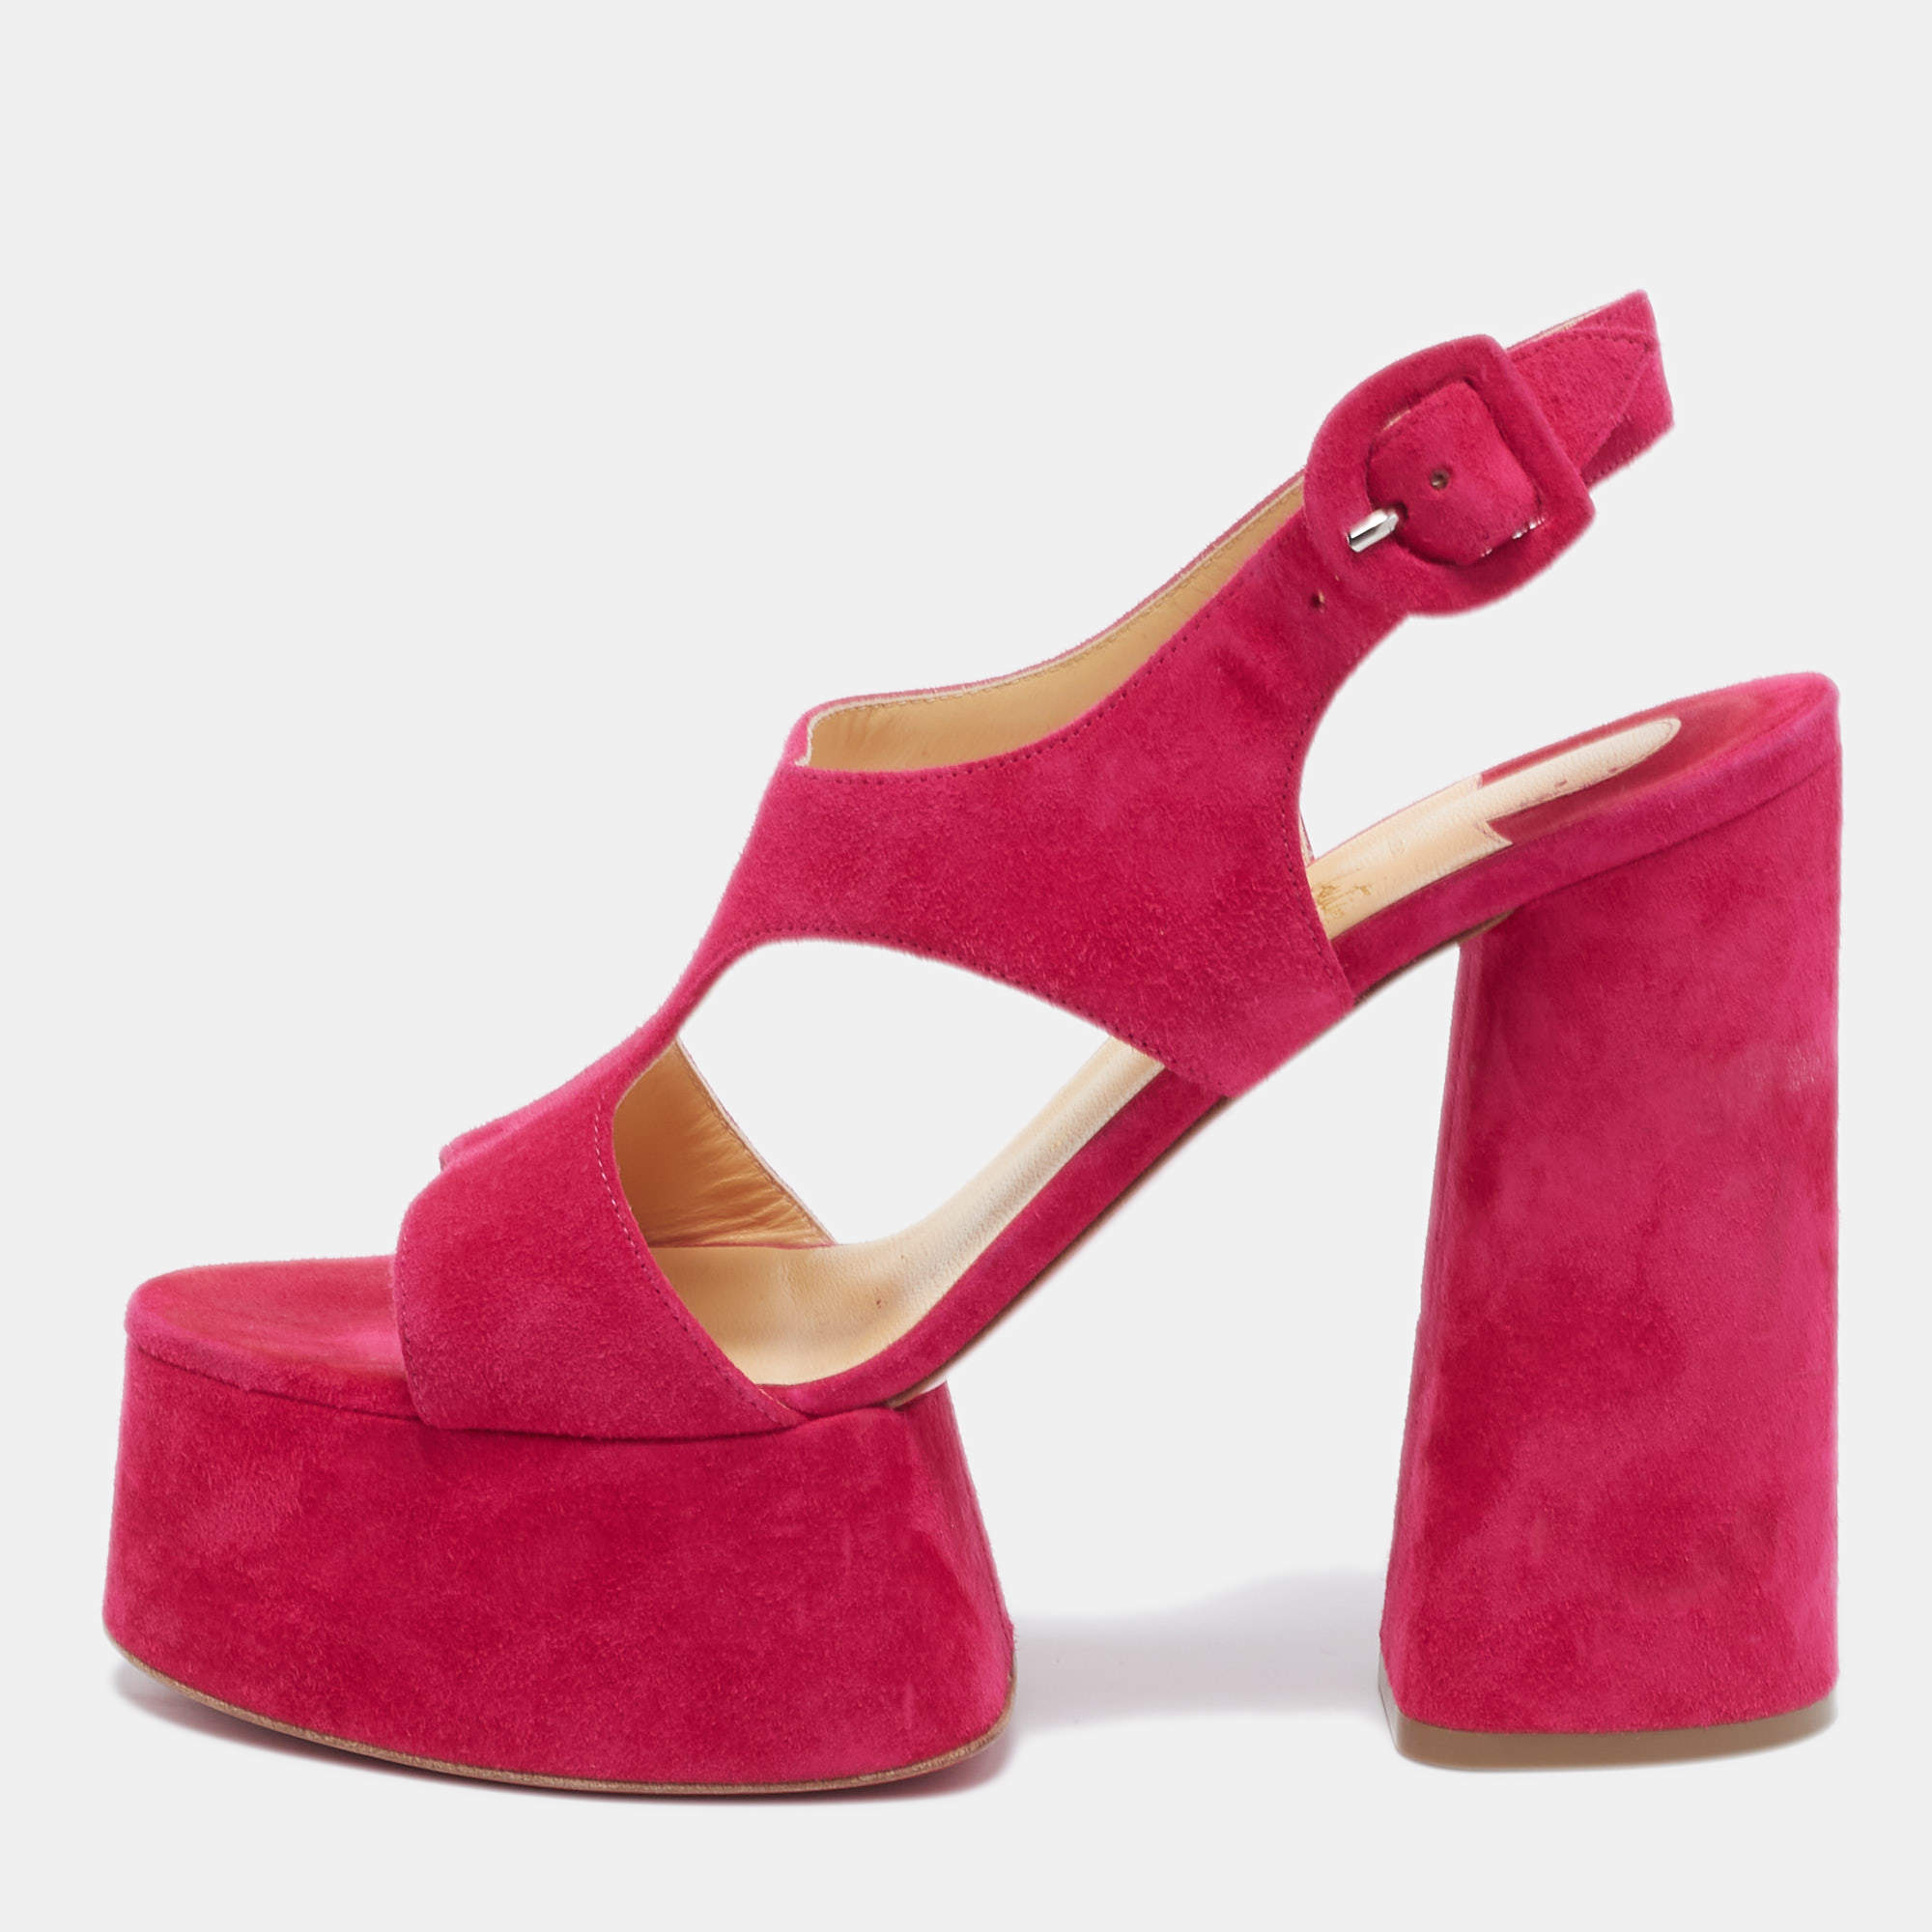 Christian Louboutin Hot Pink Suede Studded Patent